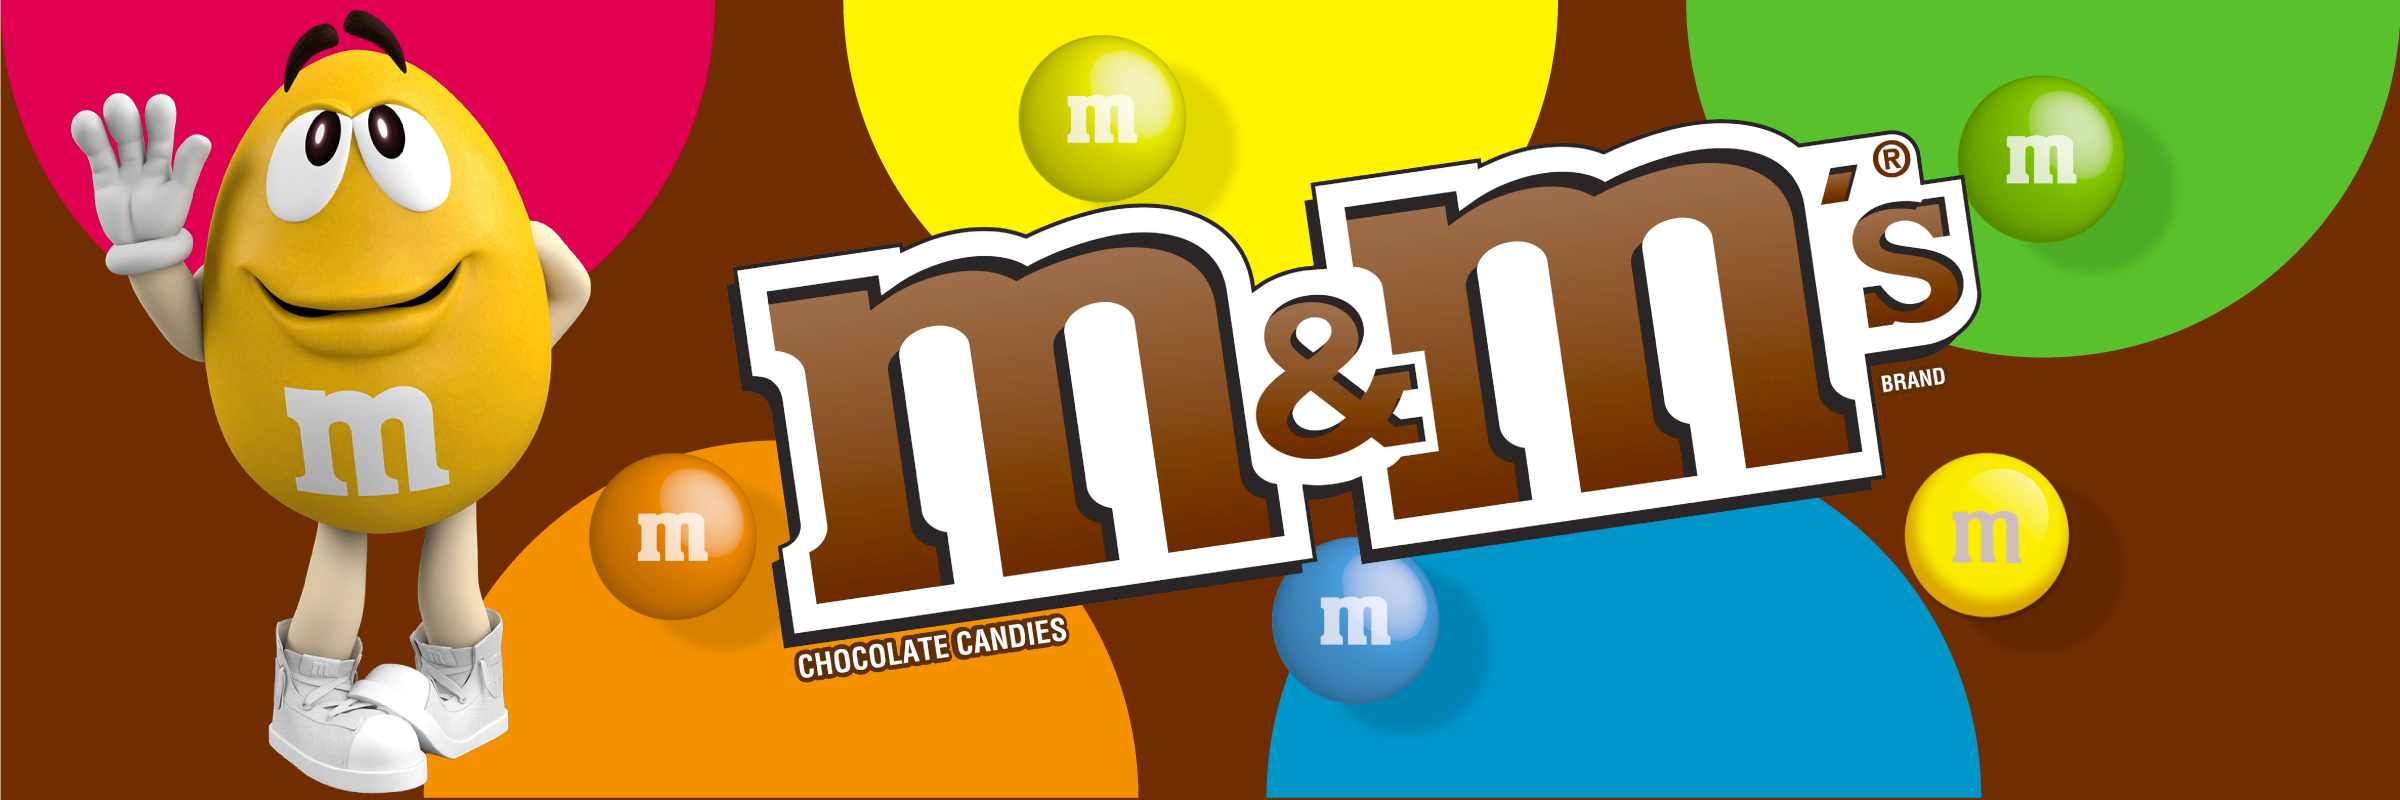 All M&M'S Chocolate Candies